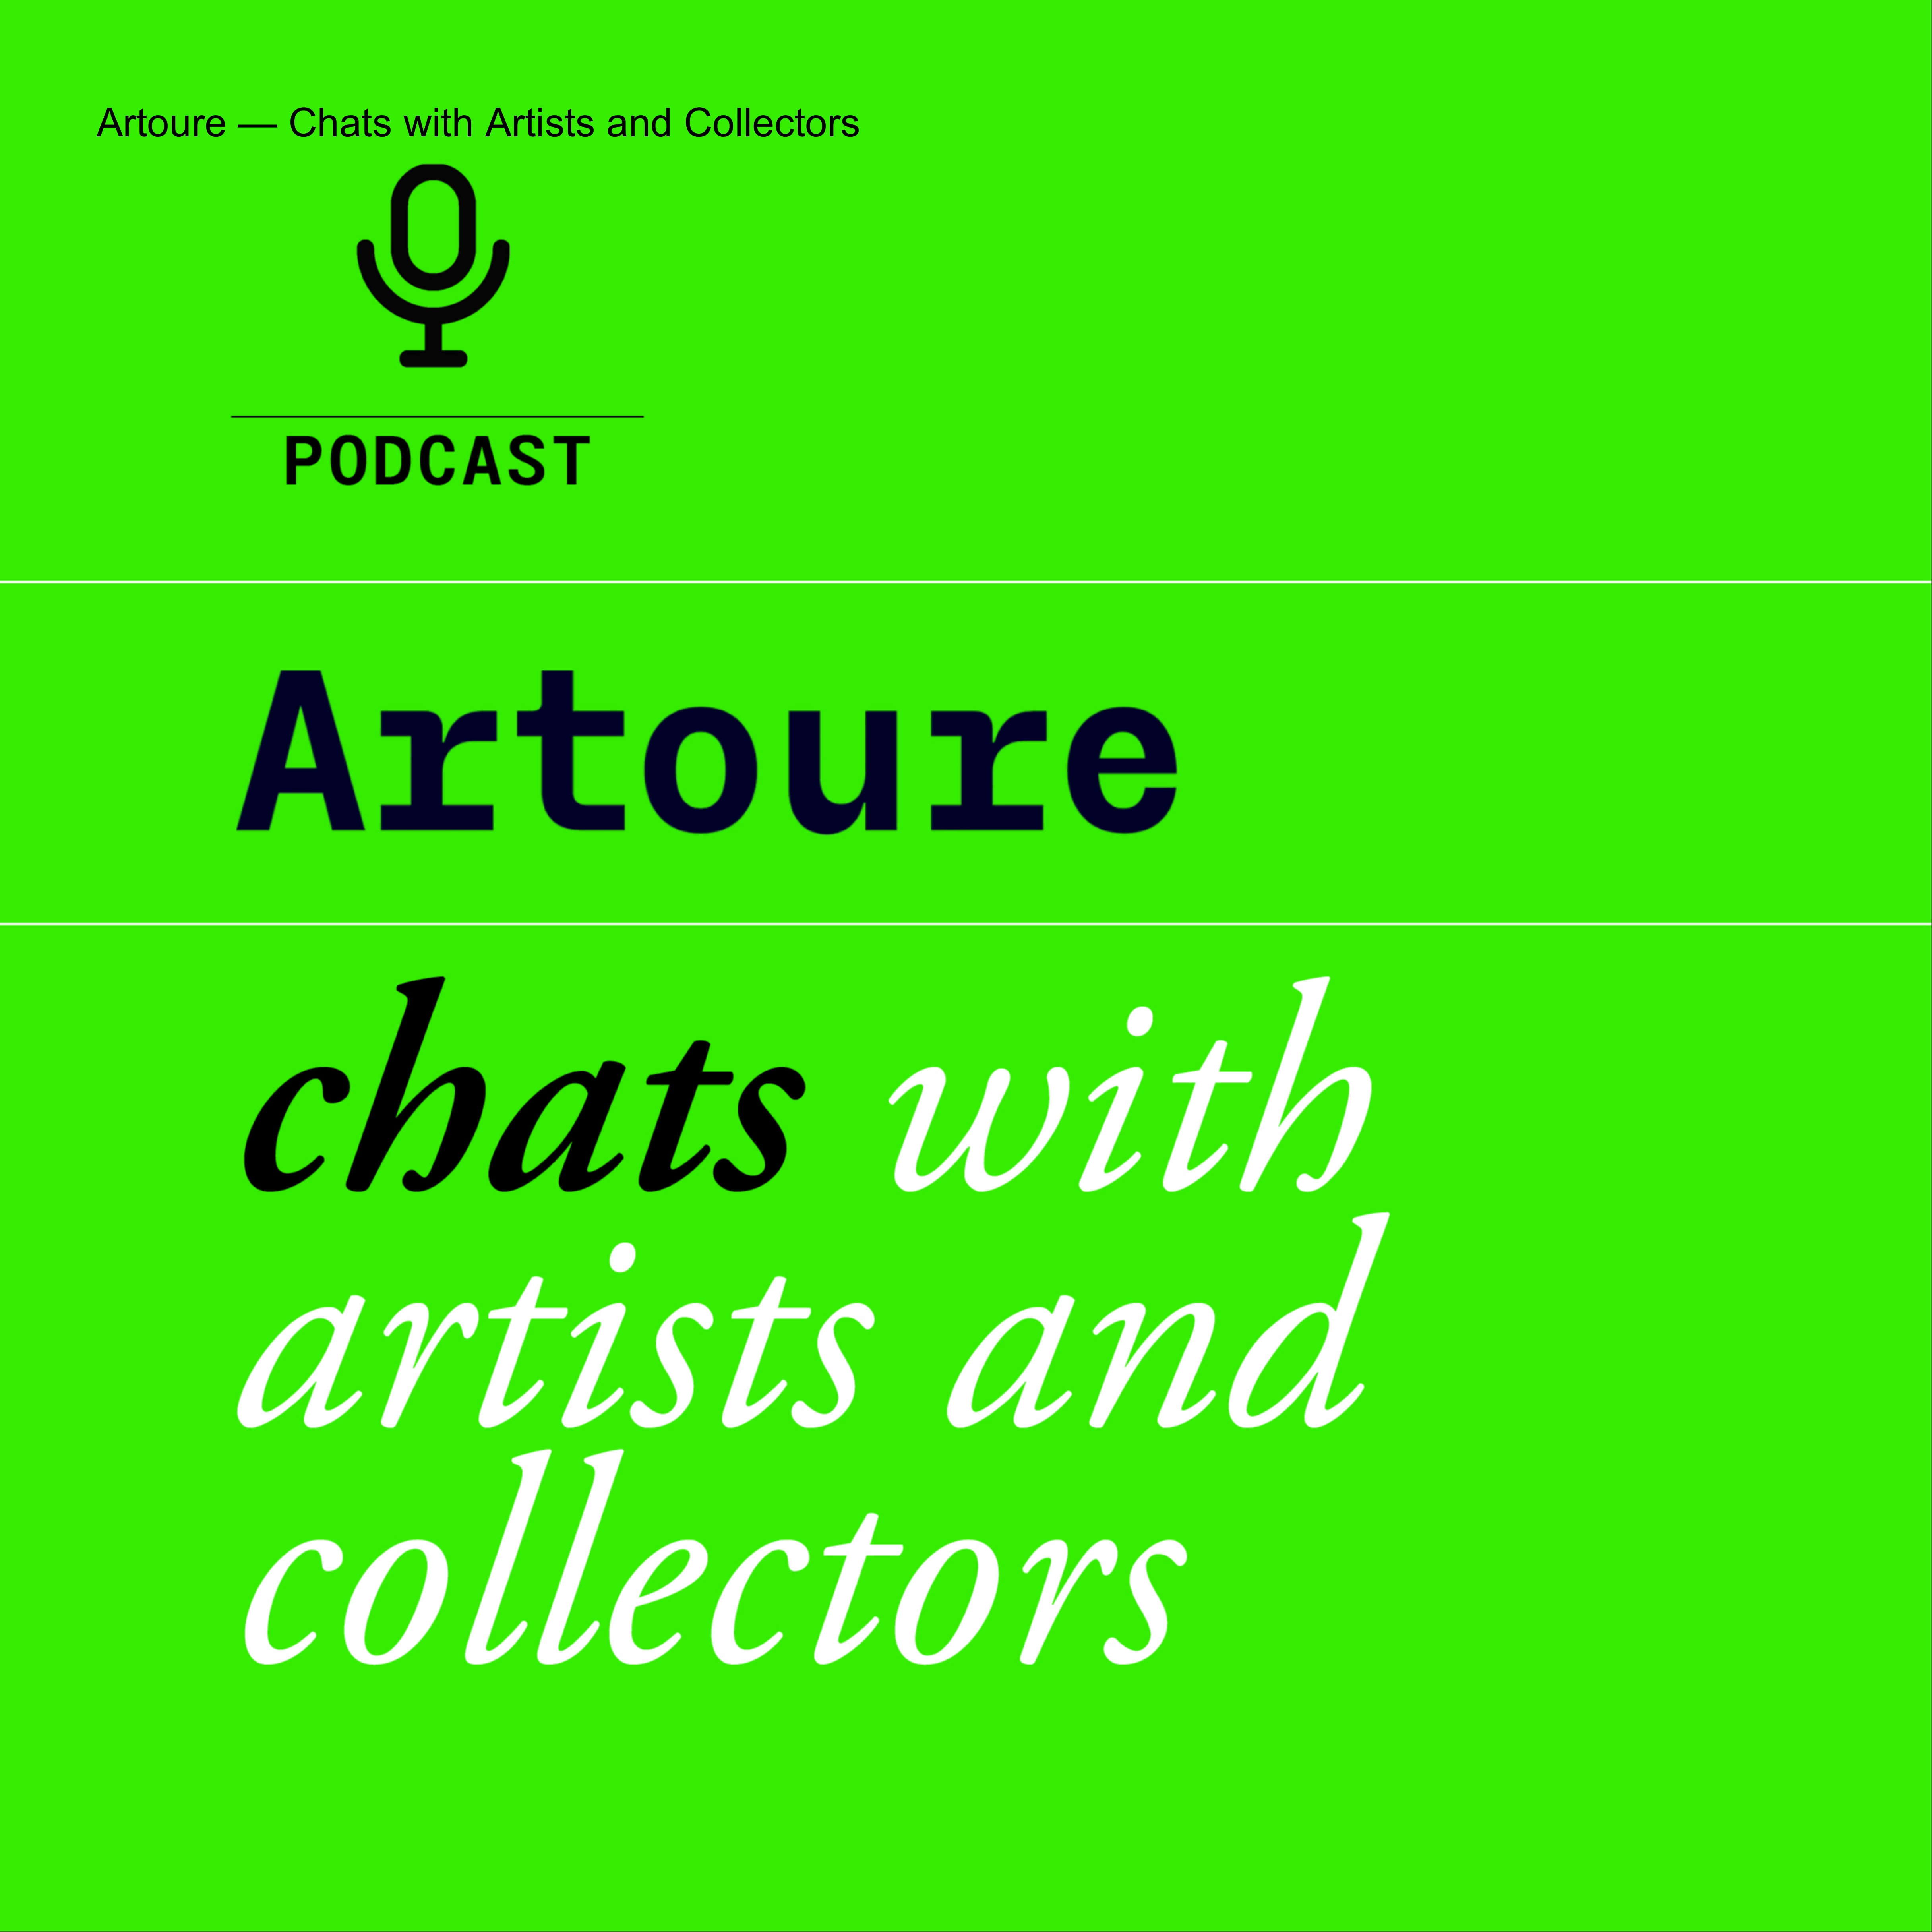 Artoure — Chats with Artists and Collectors